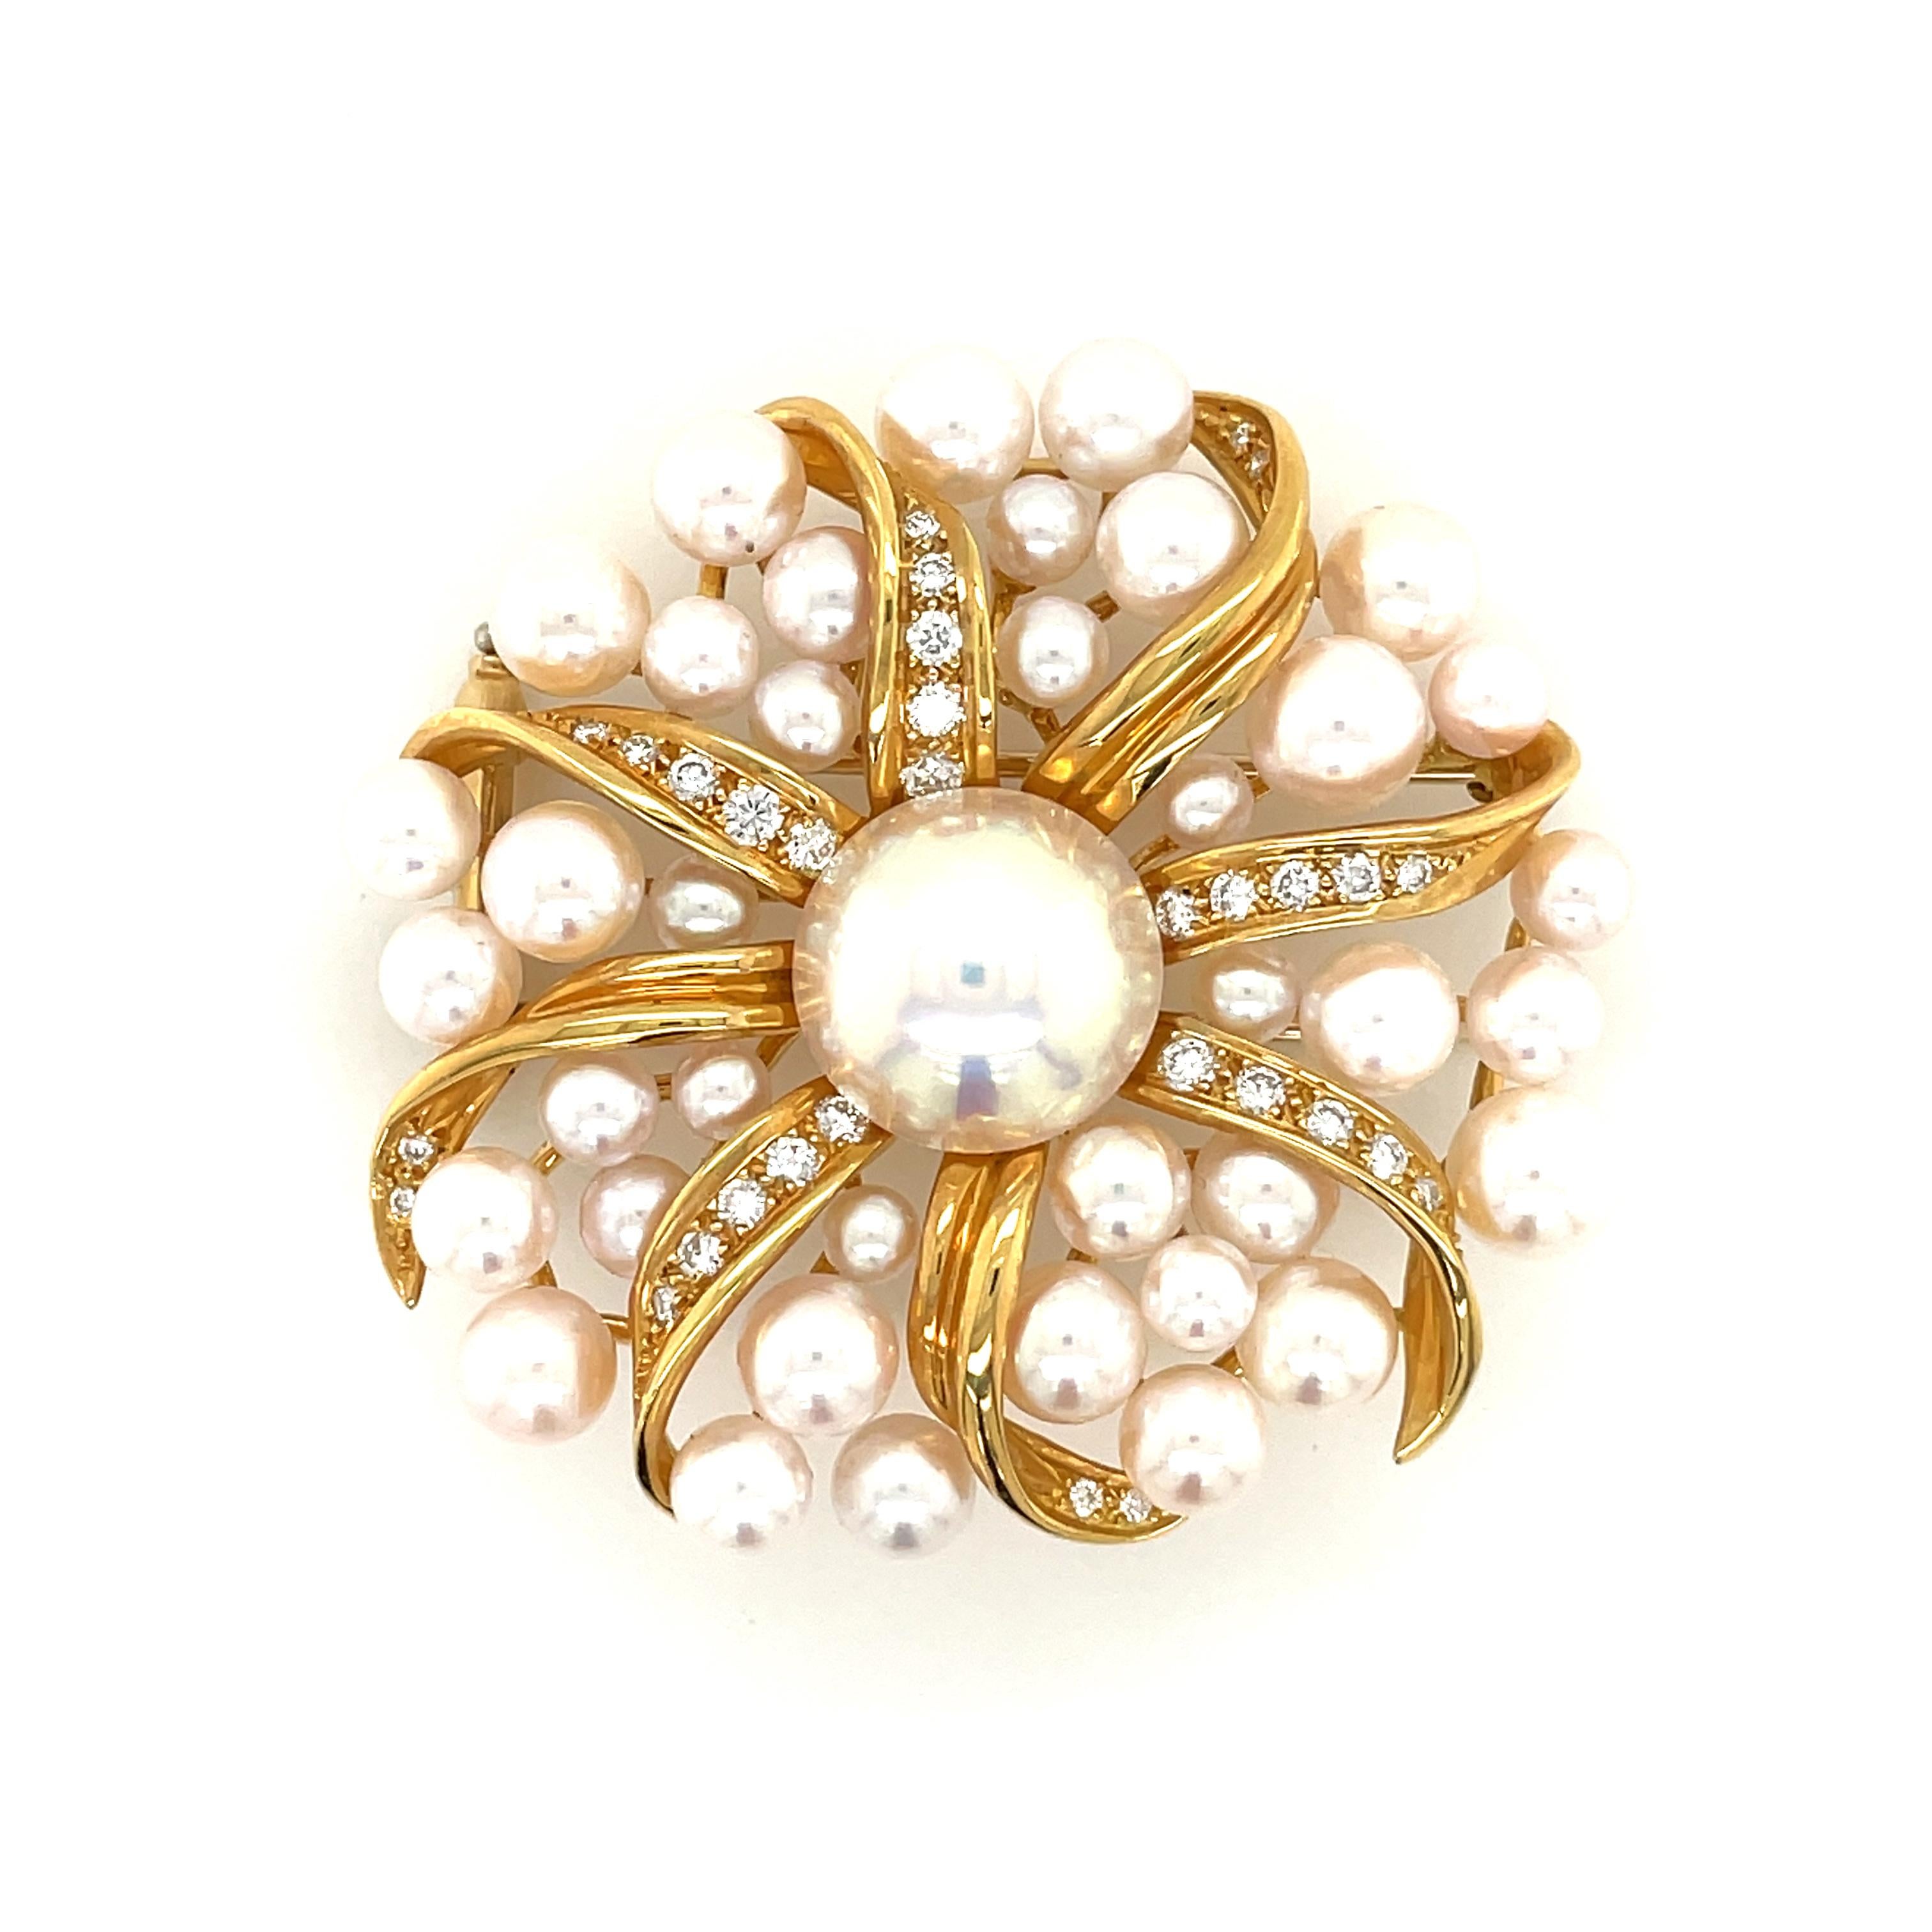 Beautiful brooch come from Tiffany & Co, is designed to look like a flower, circa 1990'.

The brooch was finely crafted of solid 18k yellow gold and is embellished with a plethora of 5.5mm-8.5mm pearls and a big Mabe pearl in the center. The brooch